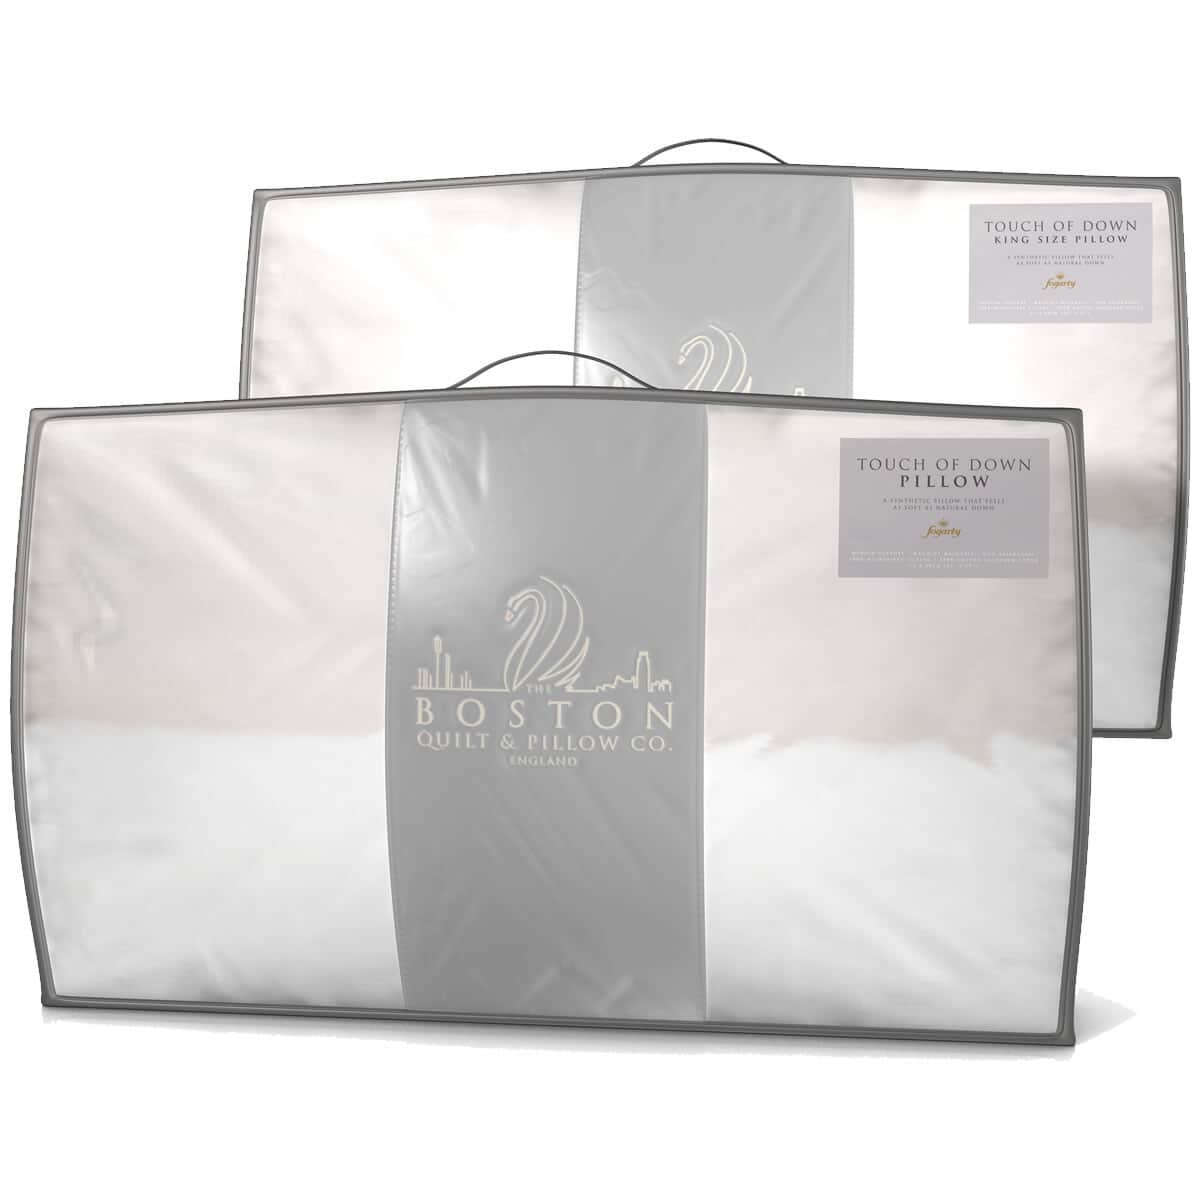 Fogarty Boston Touch of Down Pillow large